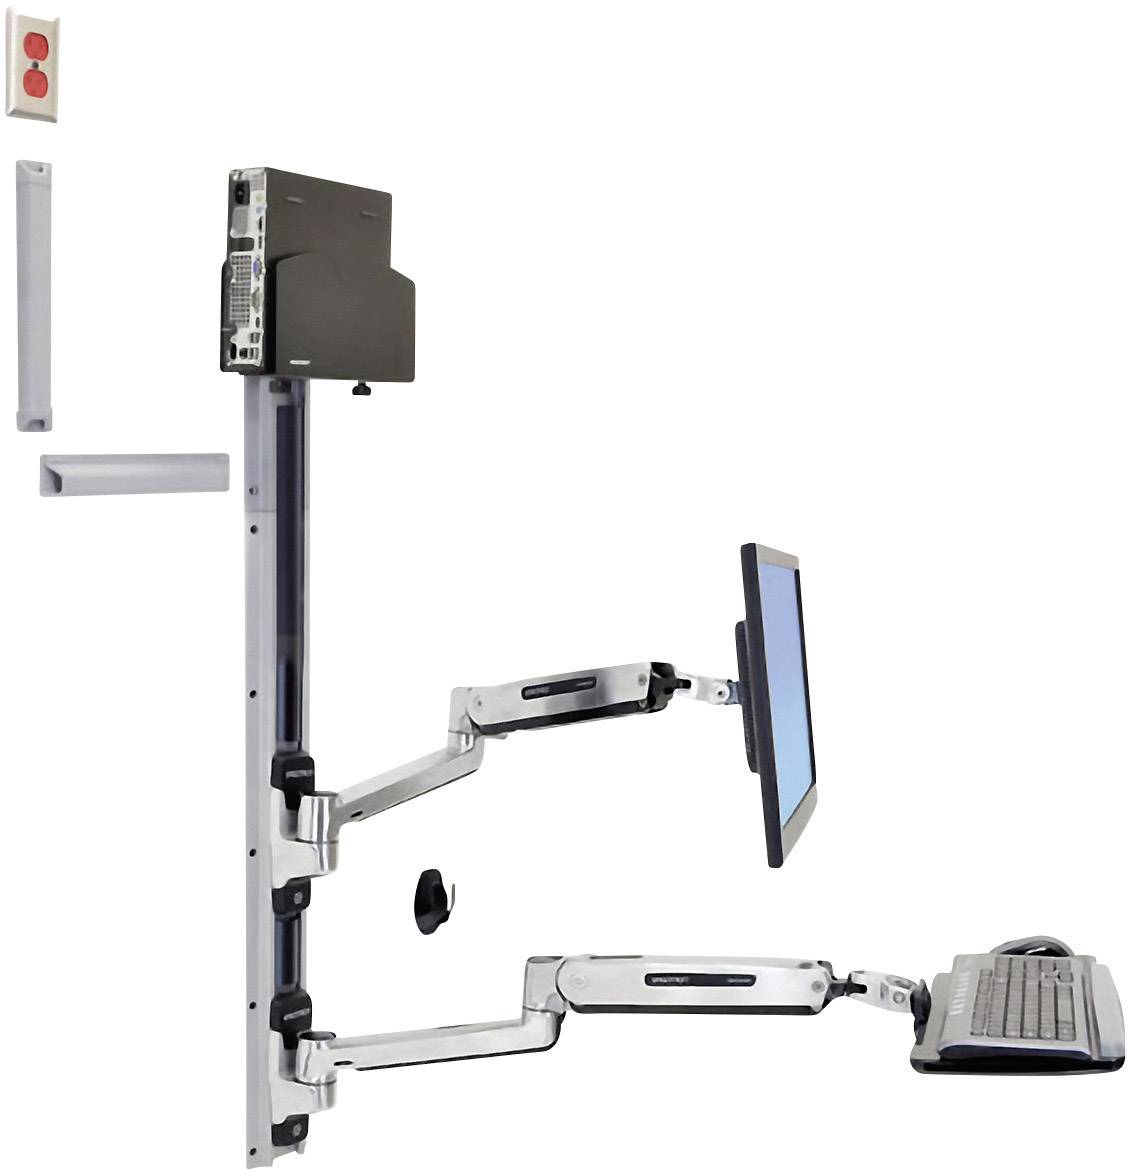 ERGOTRON LX SIT STAND WALL MOUNT SYSTEM